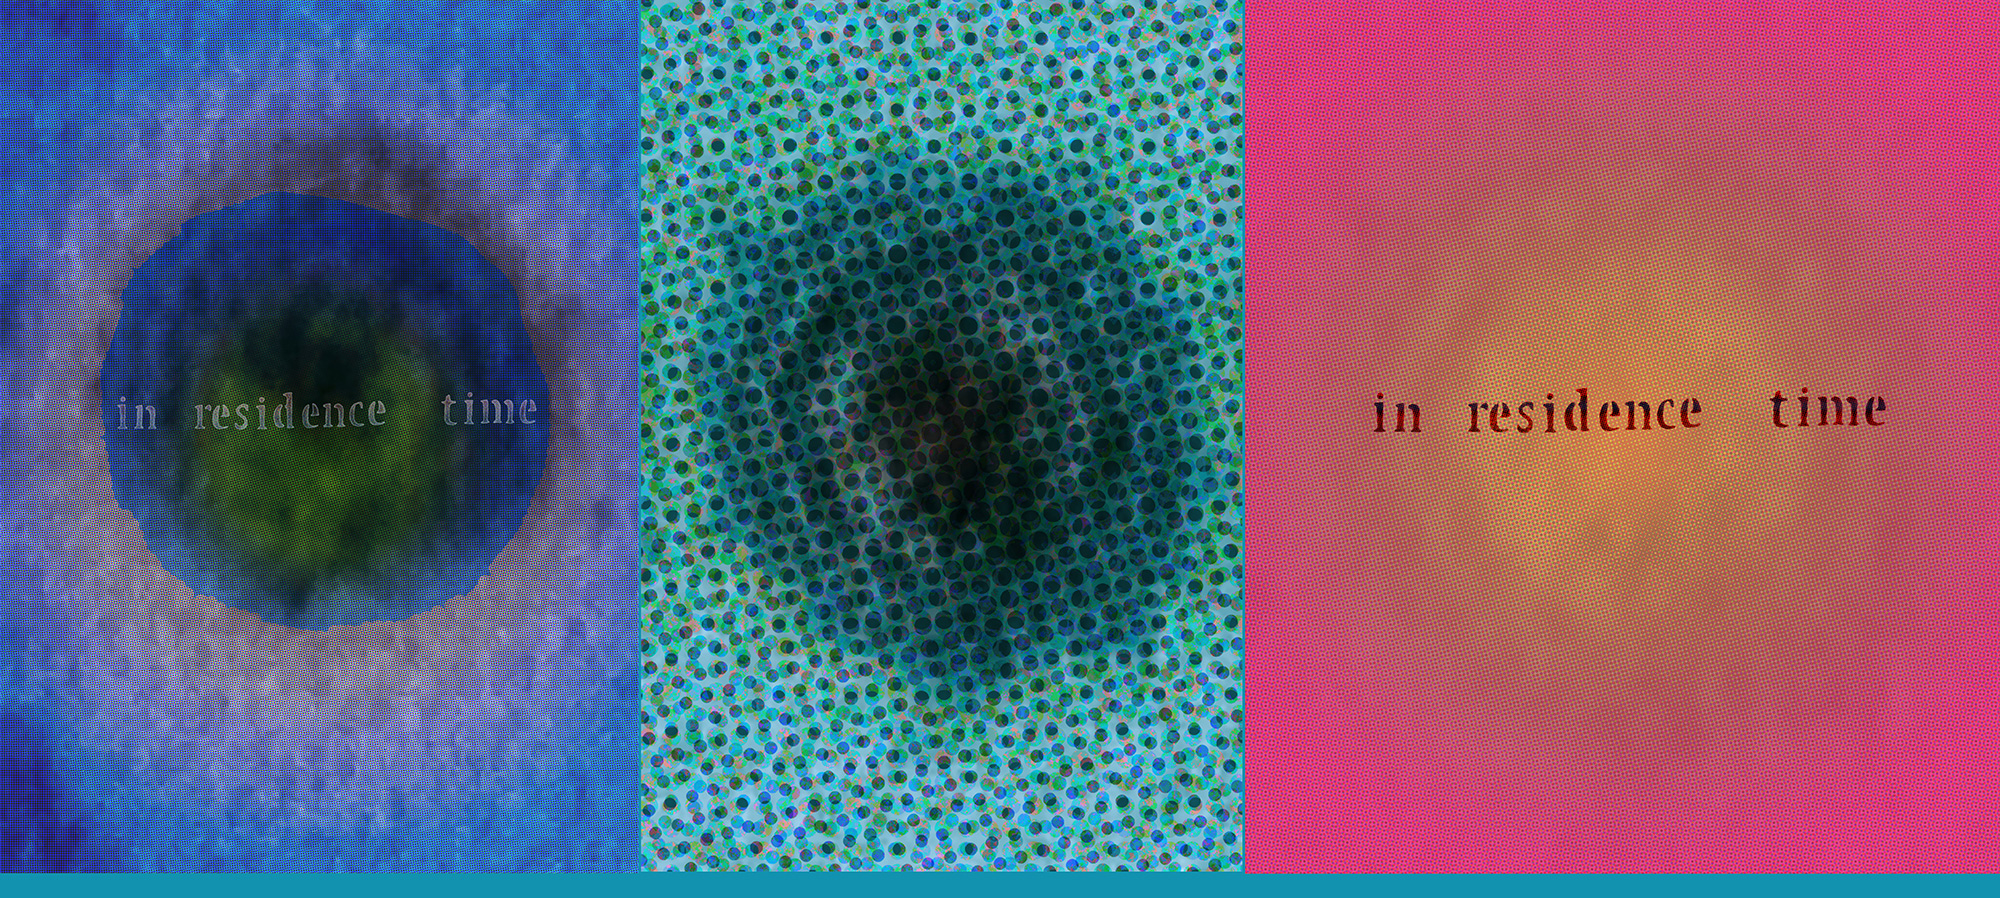 This image is an inkjet print consisting of three rectangular panels arranged in a horizontal row. In the left panel, the words “in residence time” are stamped in white across a blue and green circular form in the center of a pixelated blue color field. The center panel contains a similar circular form, but this one is black and dark blue on a light blue ground, and the panel is also filled with a pattern of overlapping dots in blue, black, green, and pink. The right hand panel shows an orange circular form against a pixelated pink background, and the words “in residence time” are stamped across it in dark red text.